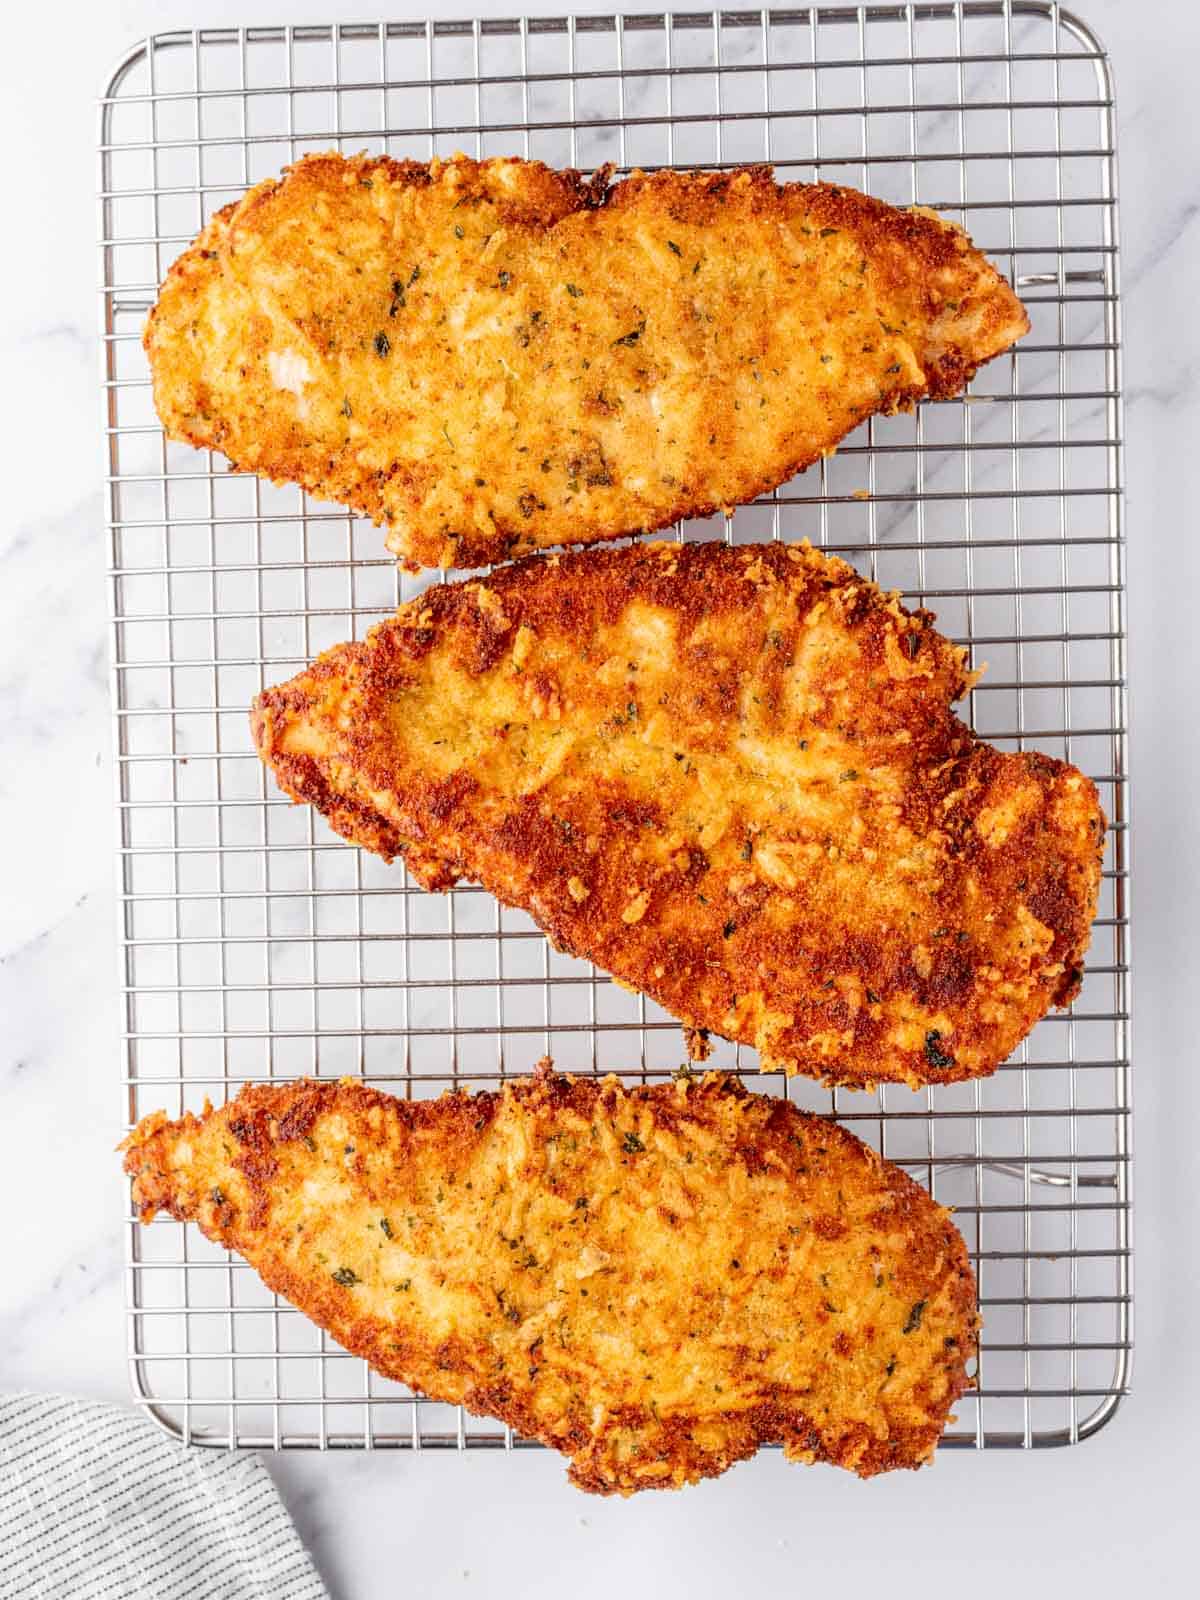 Parmesan crusted chicken rests on a wire rack